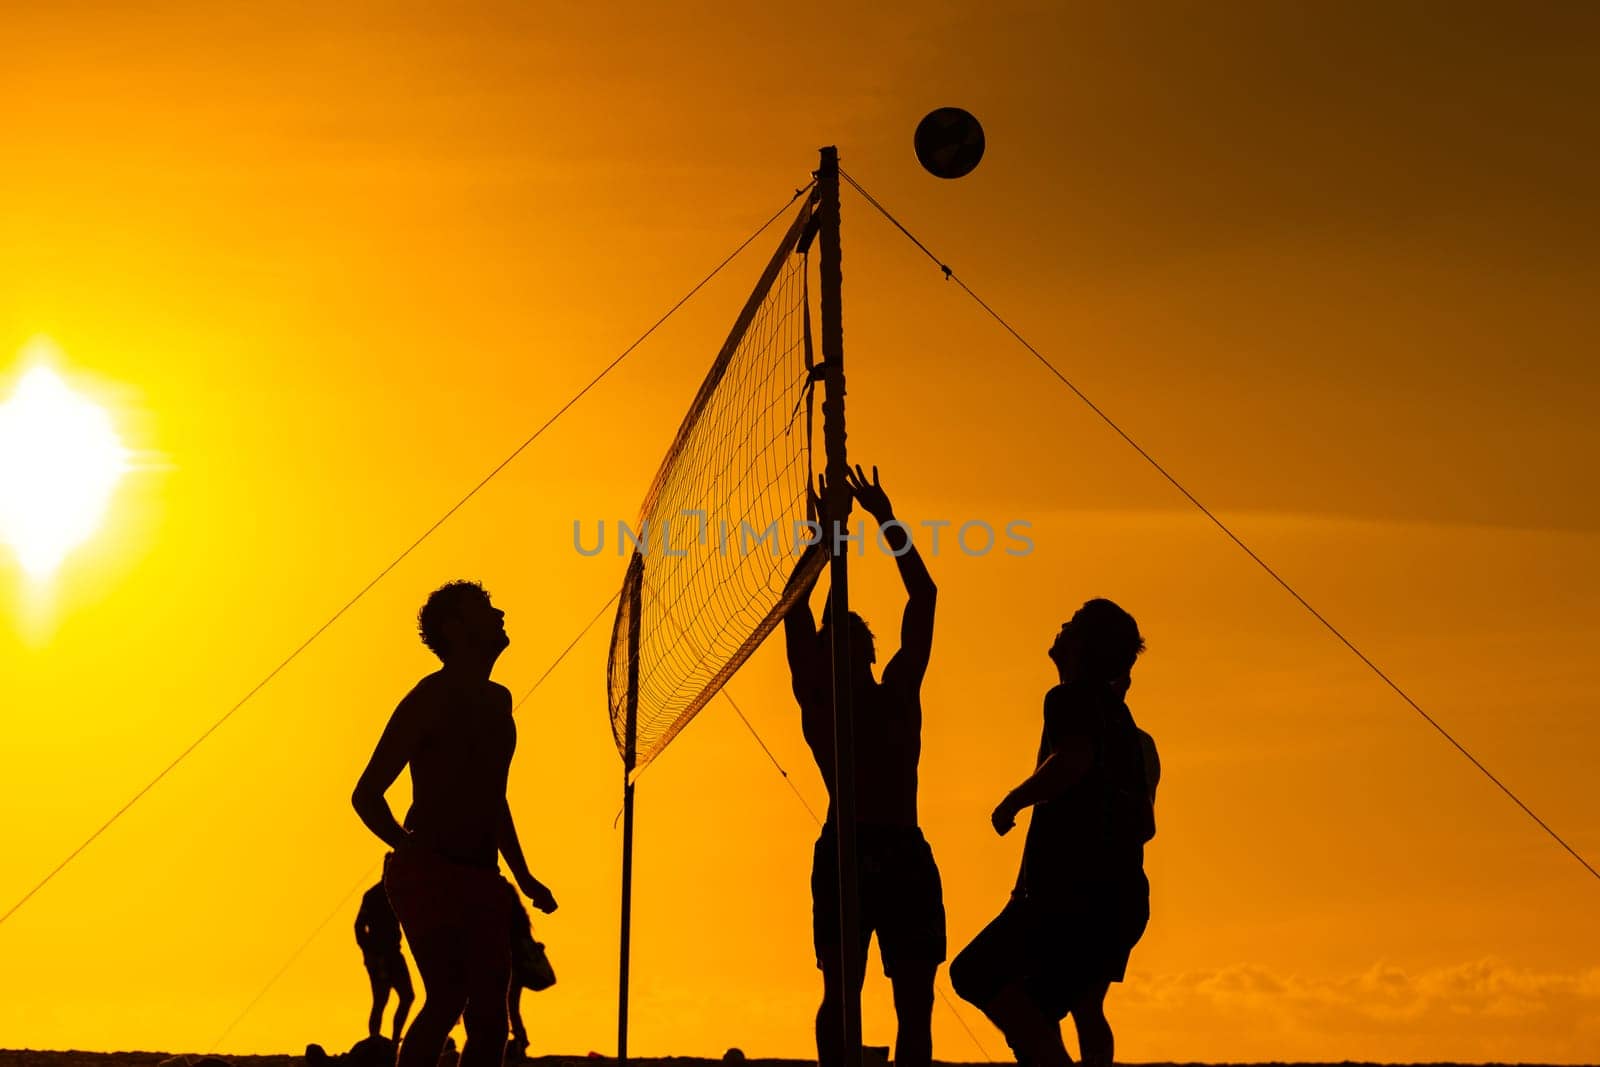 A group of people playing a game of volleyball